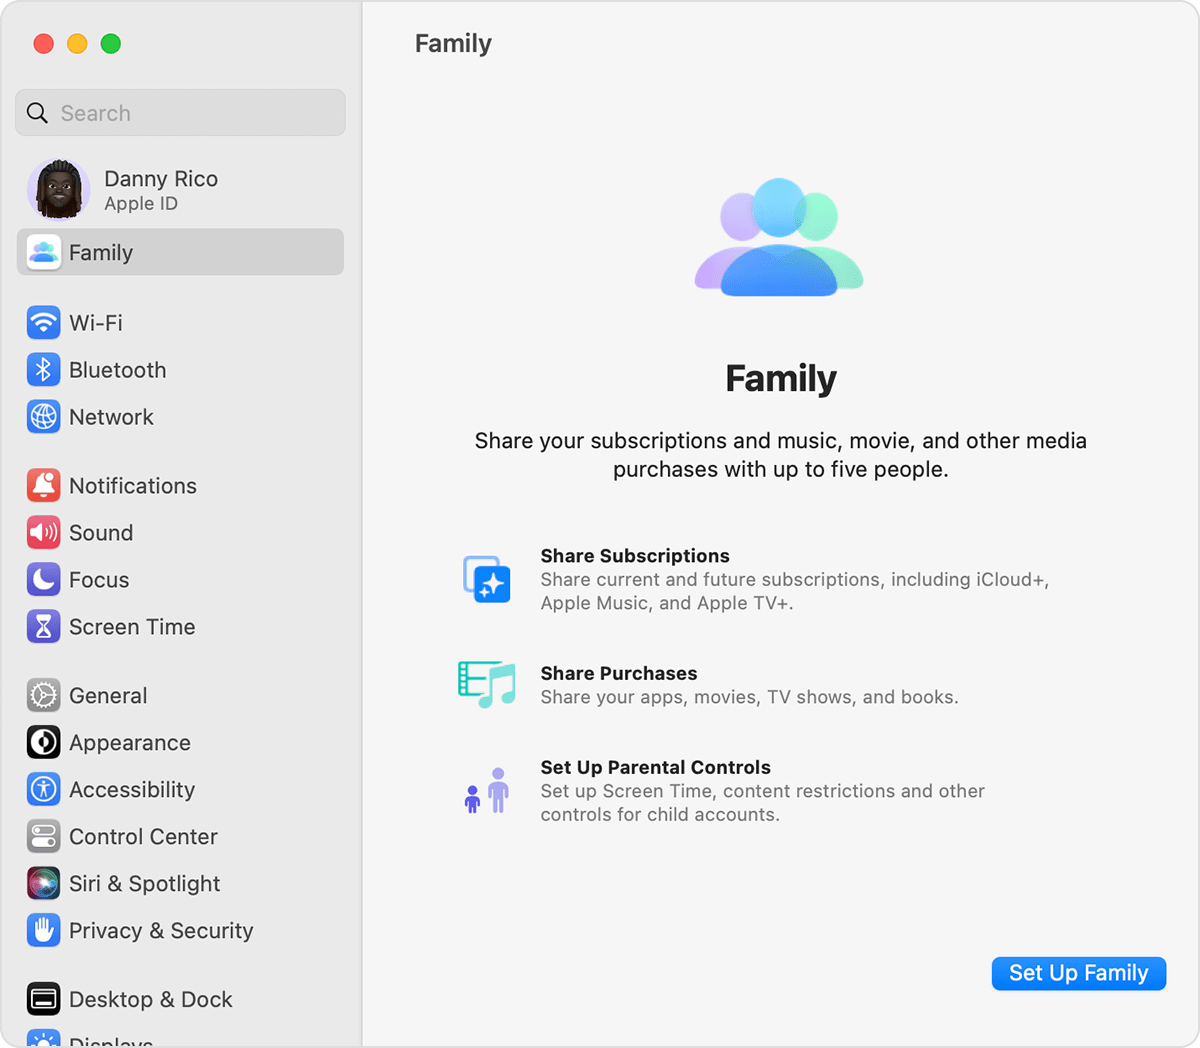 The Set Up Family button is in the bottom right after you've clicked Family.